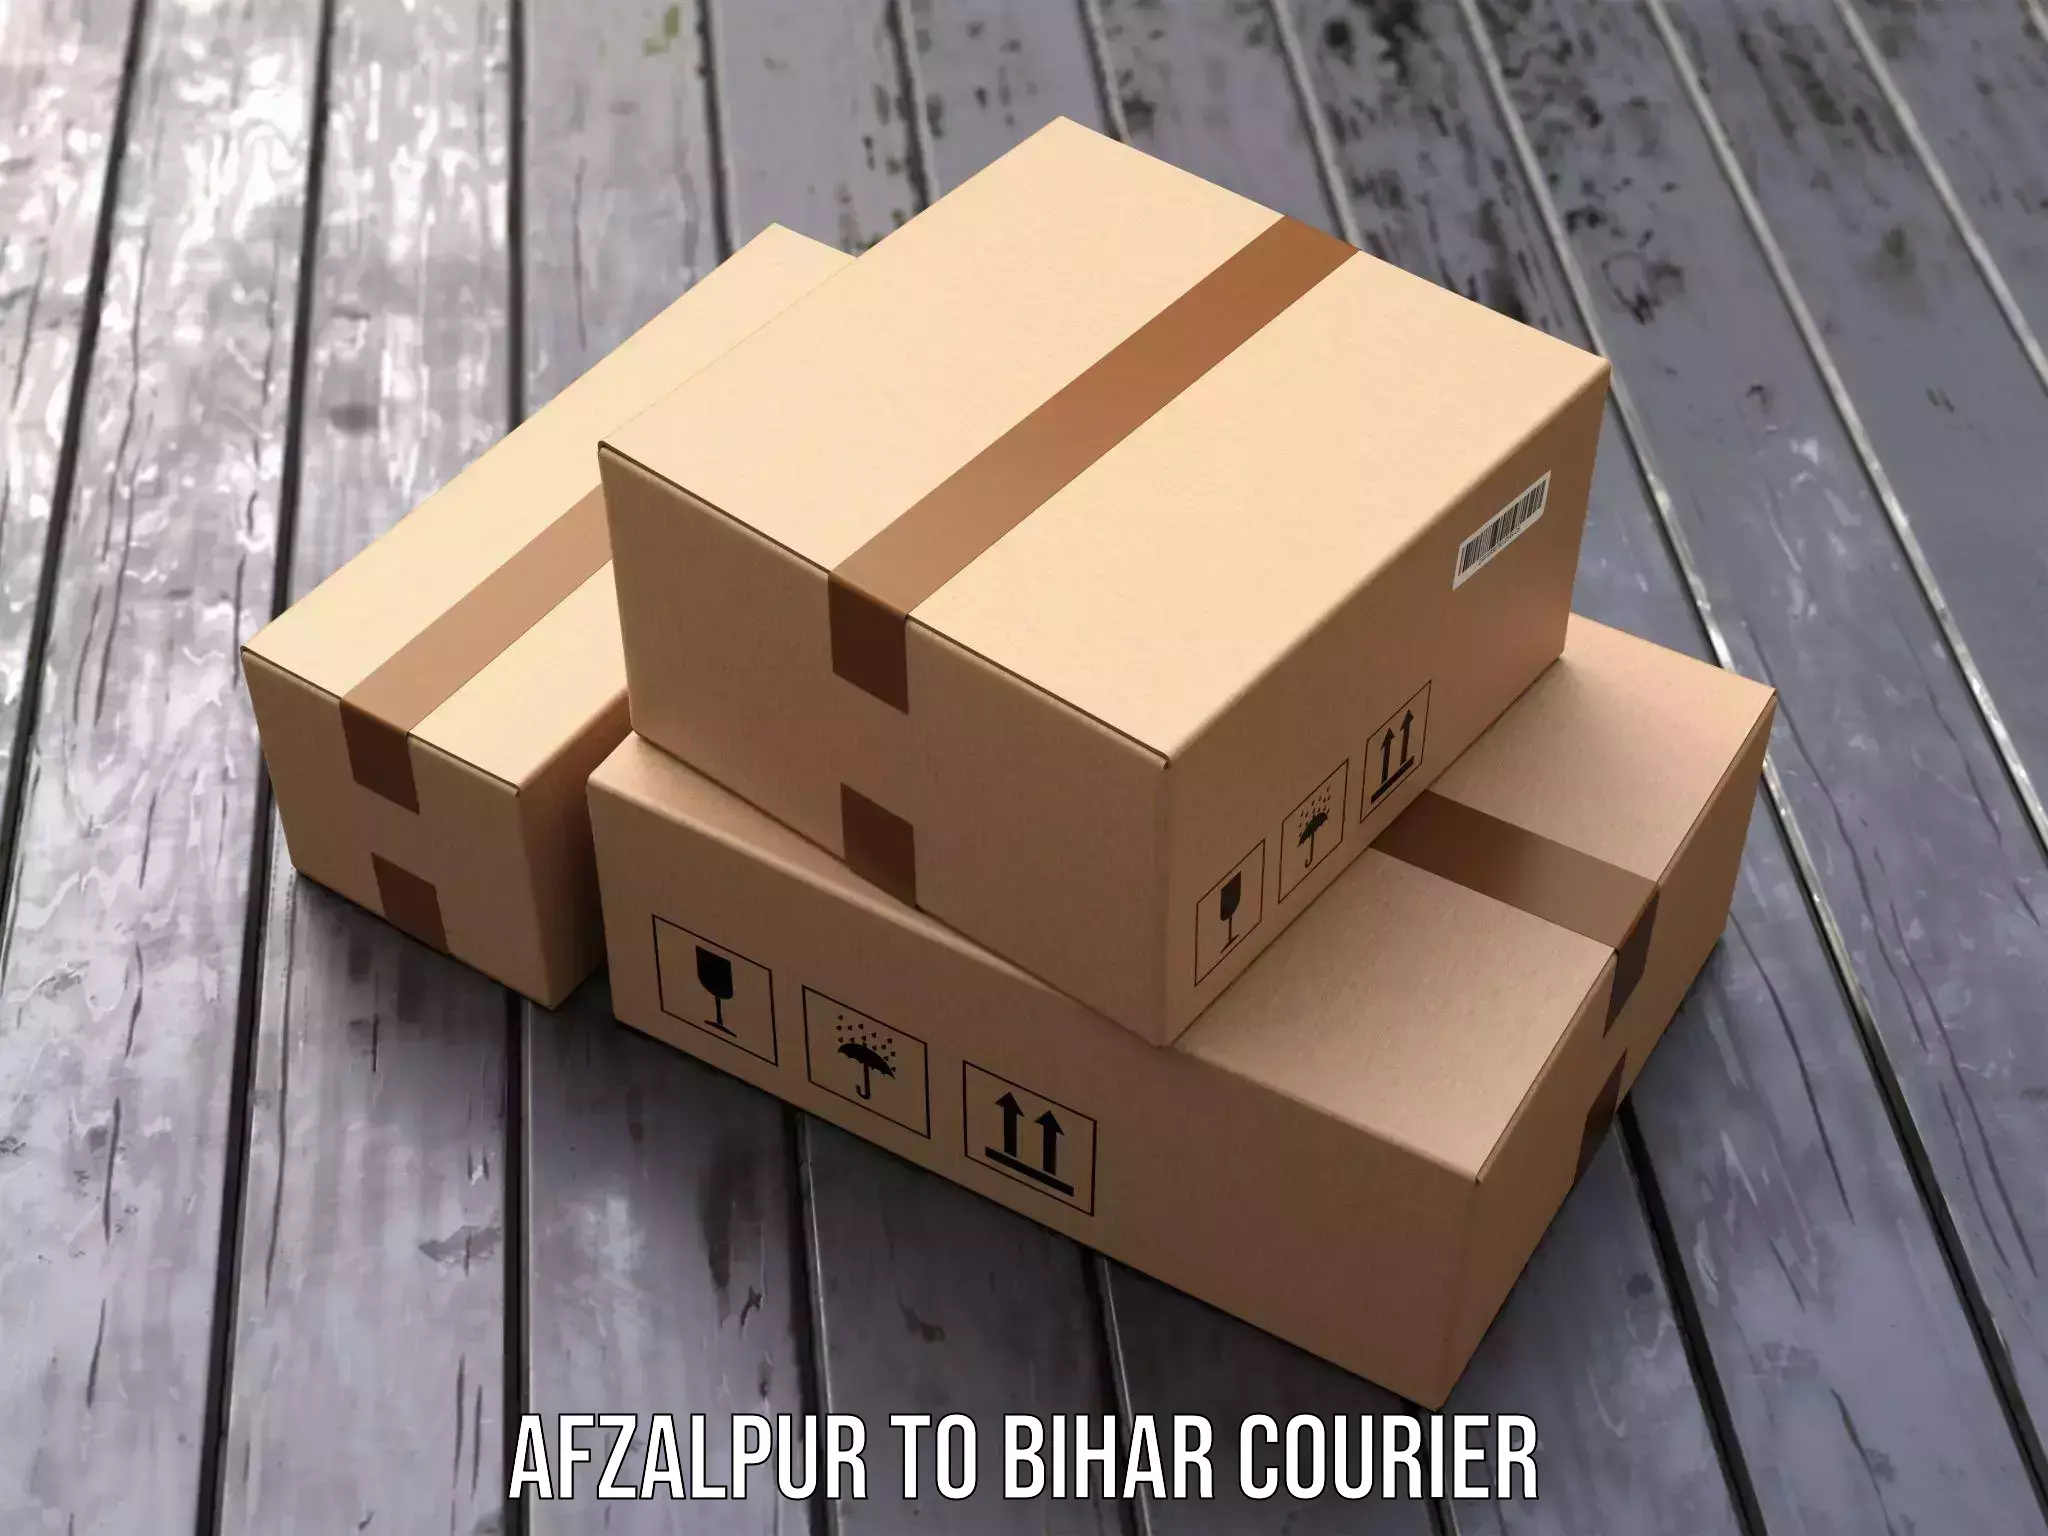 Express shipping in Afzalpur to Dehri